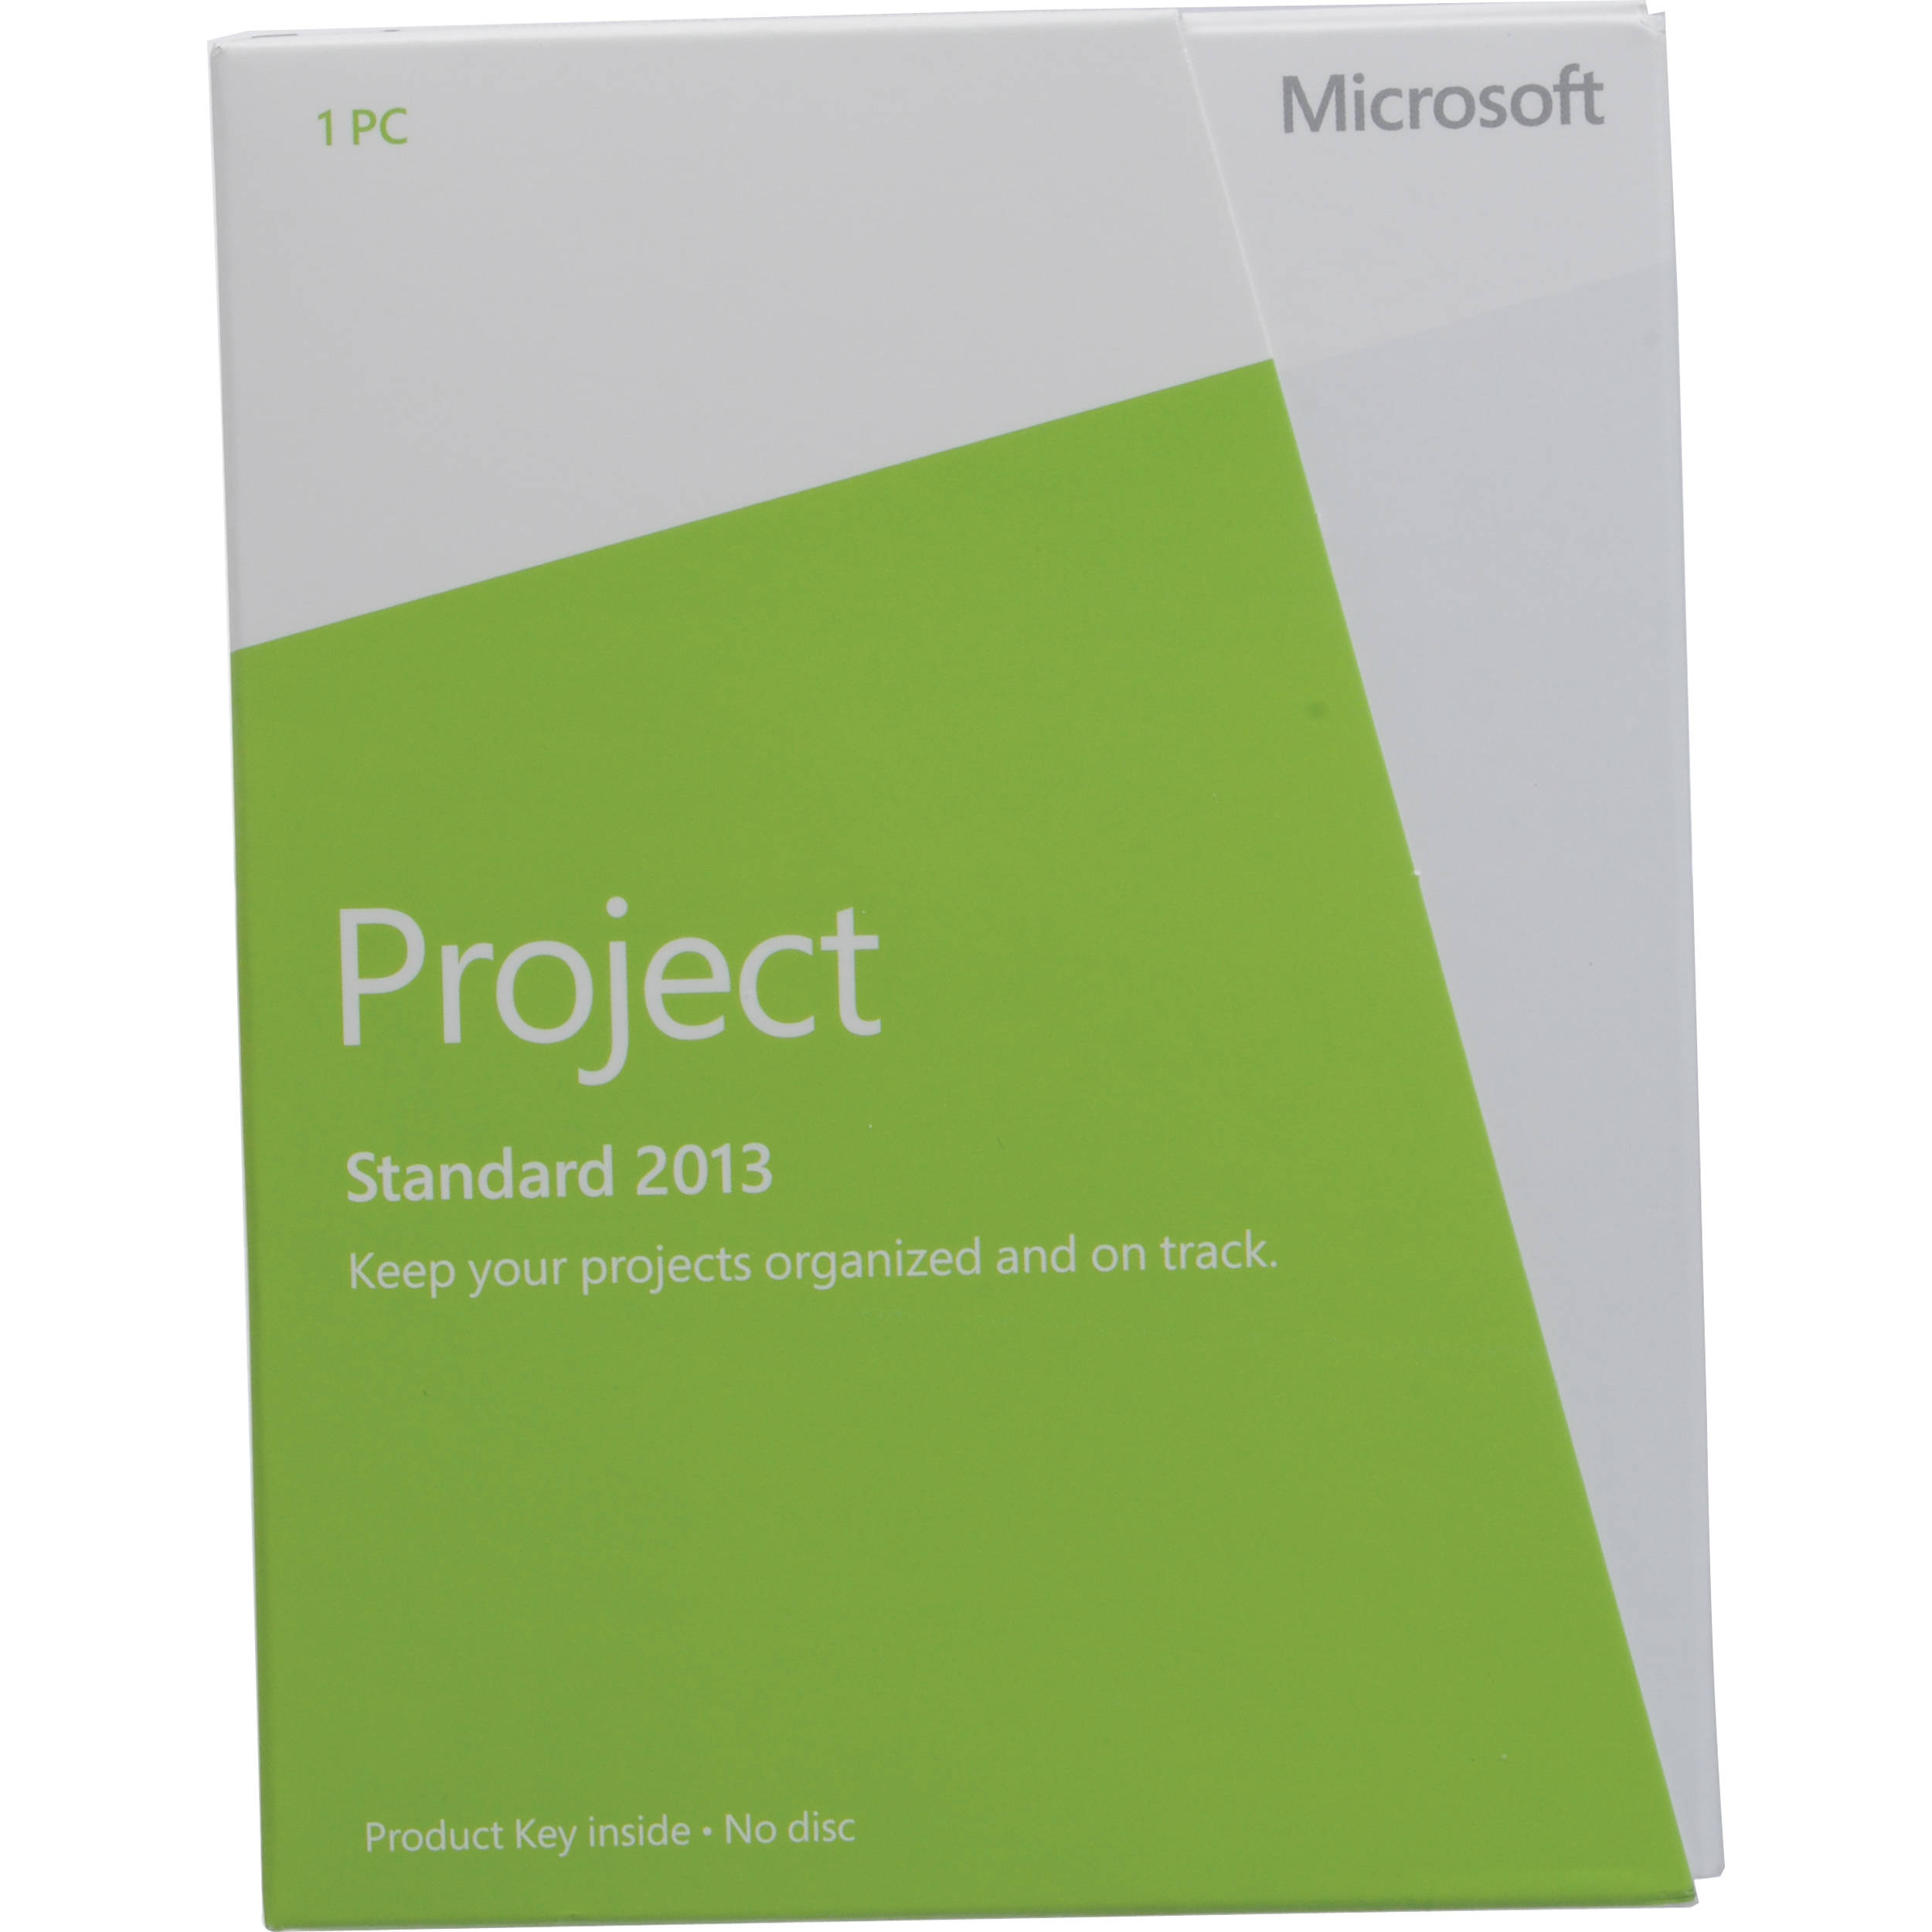 Where to buy MS Project Standard 2013